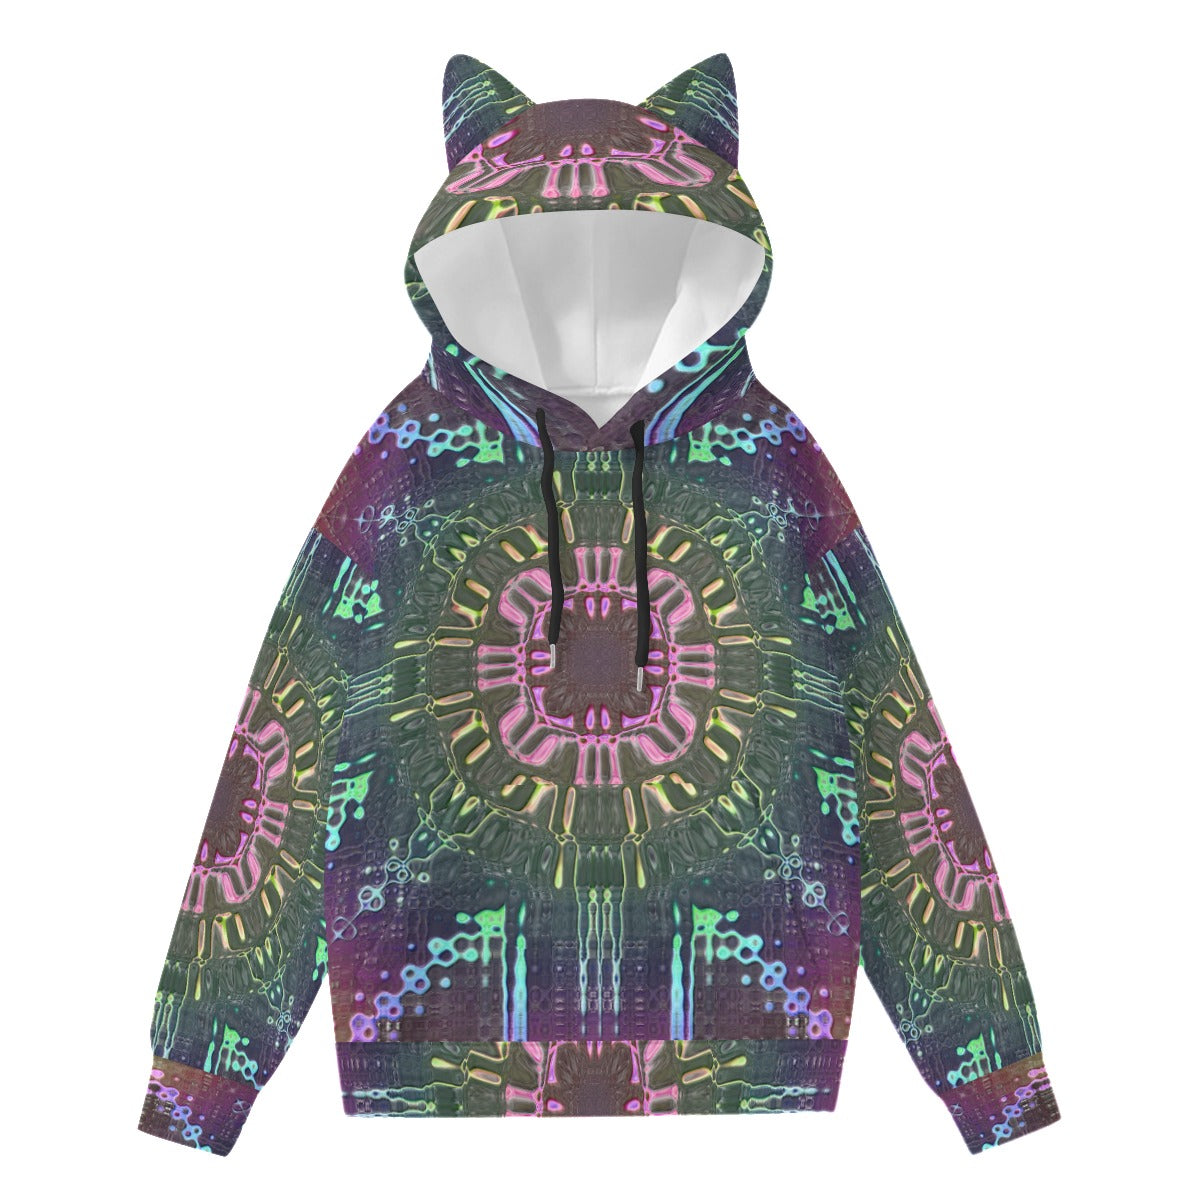 "Polycircuitry" Kitty Couture Hoodie